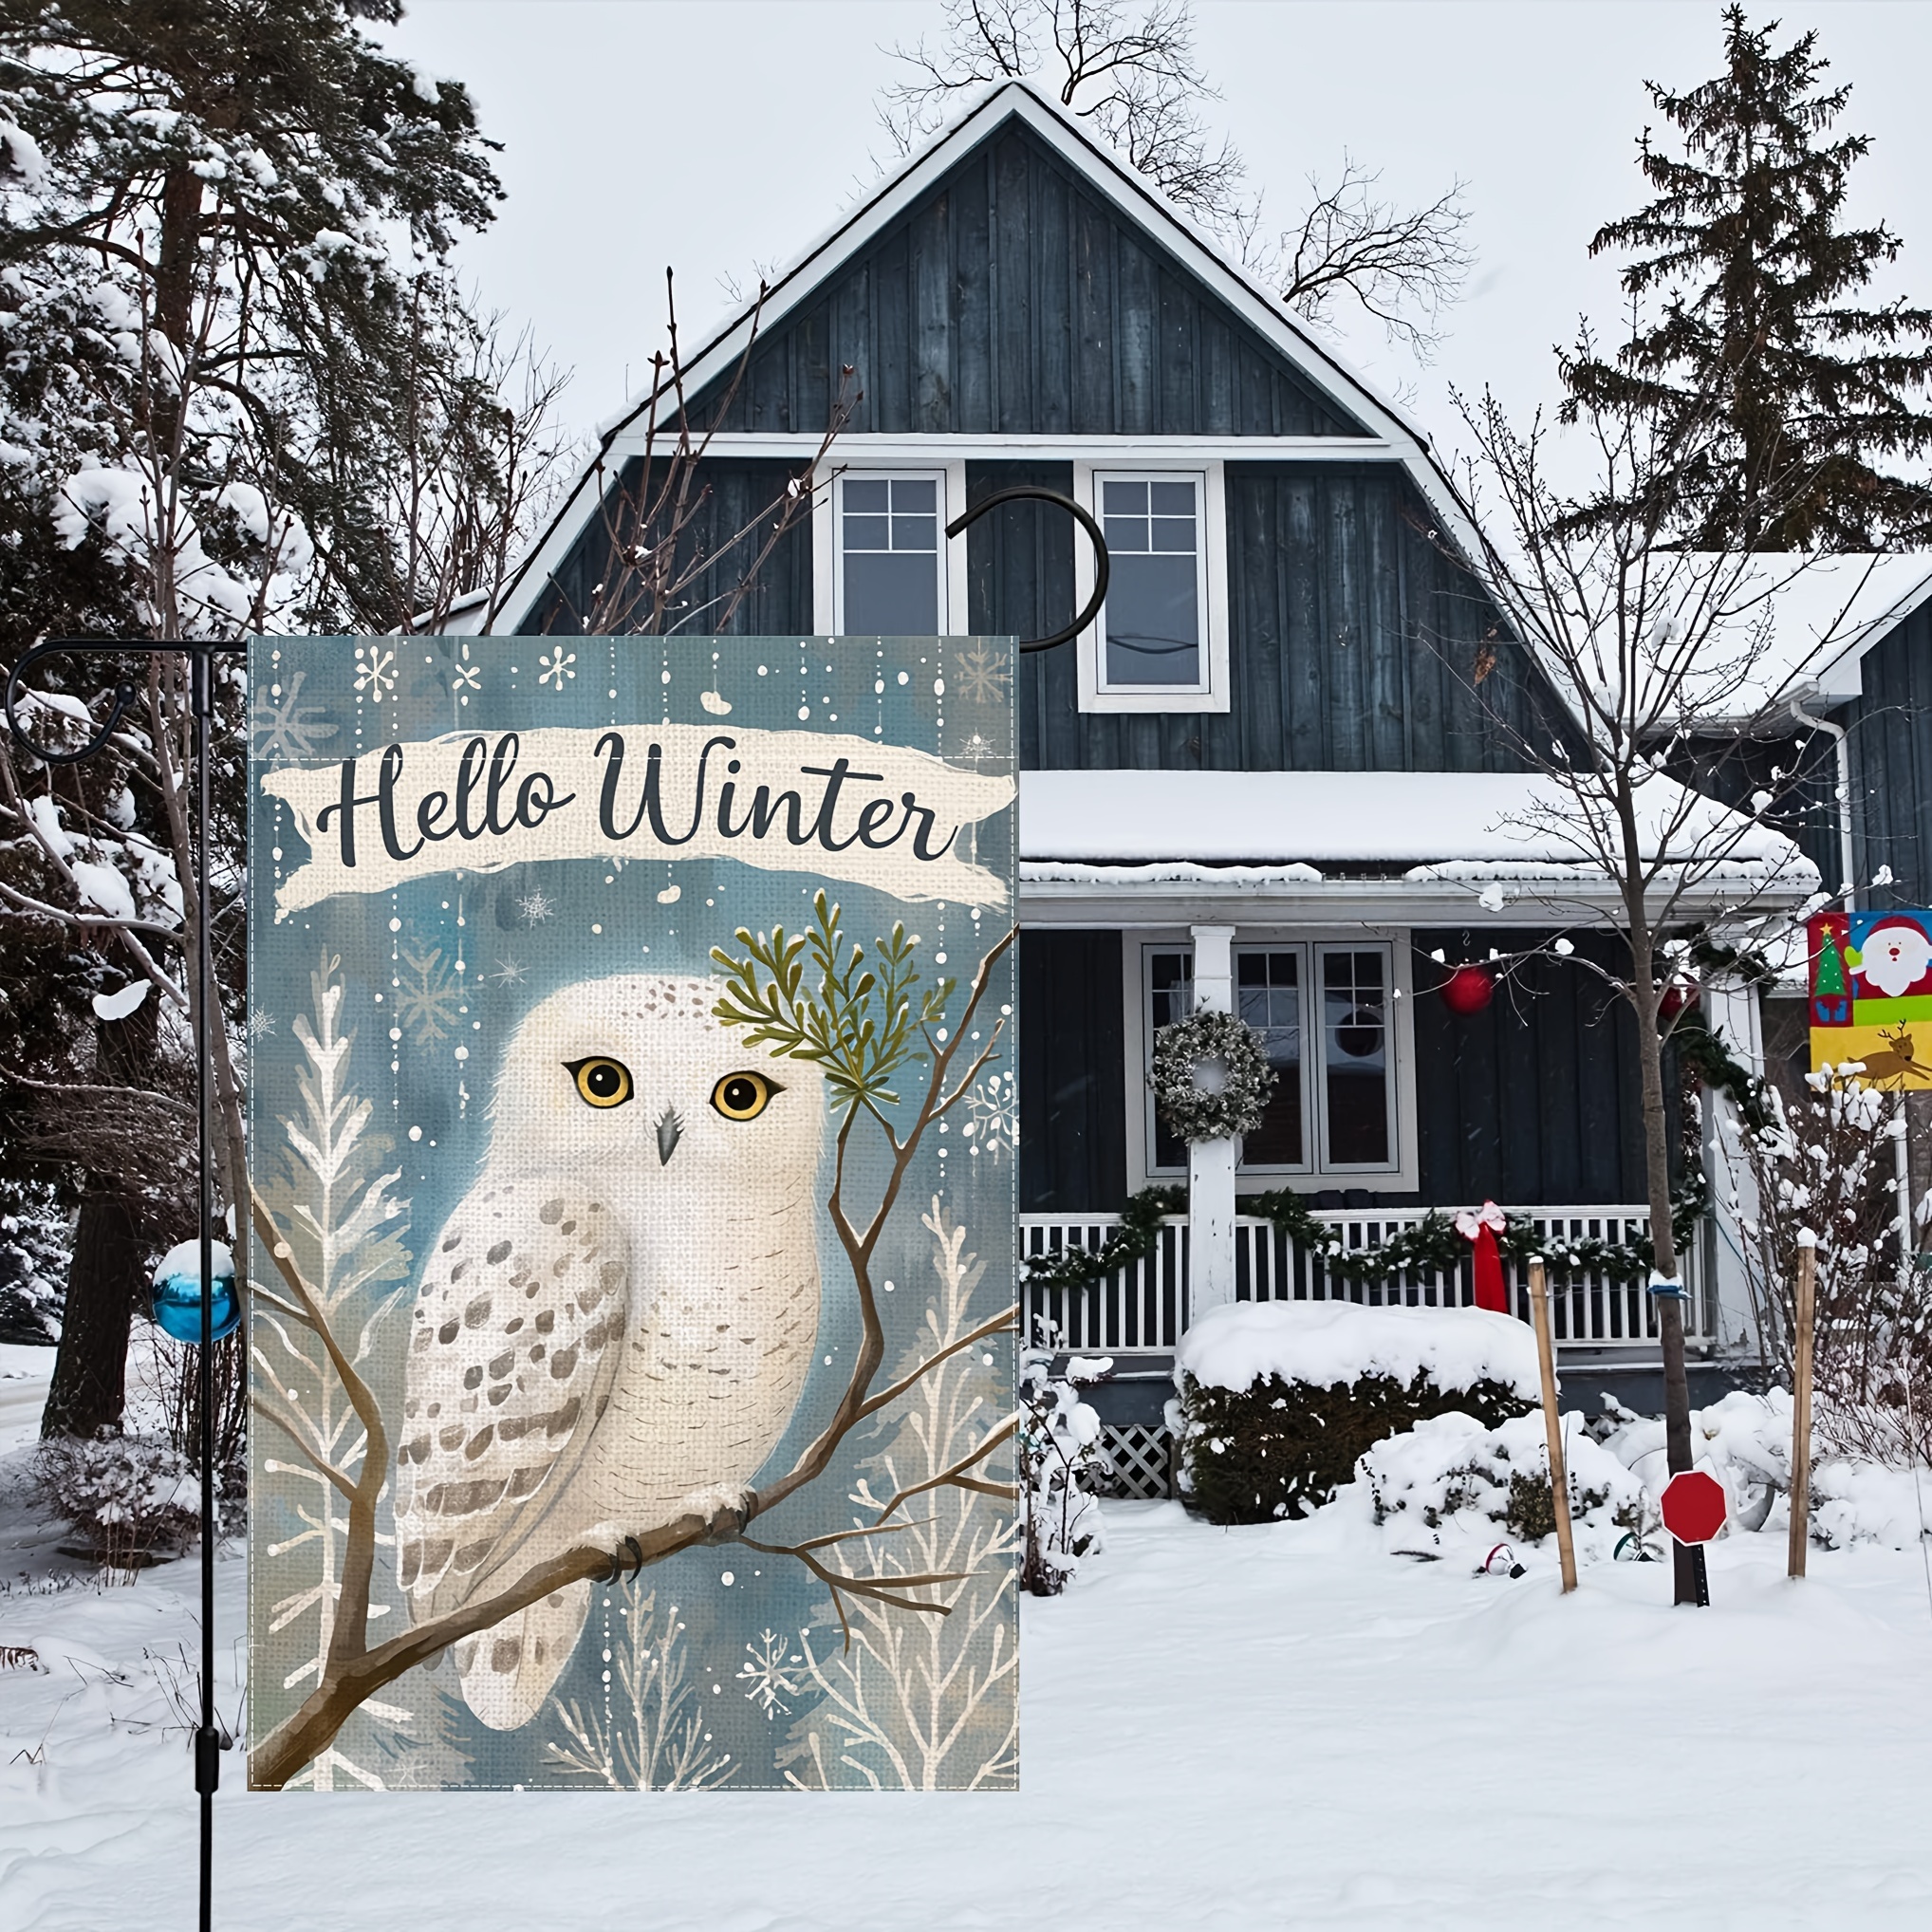 

Charming Snowy Owl & Evergreen Leaf Garden Flag - Double-sided Linen, Weather-resistant 12x18 Inch - Perfect For Winter & Holiday Outdoor Decor